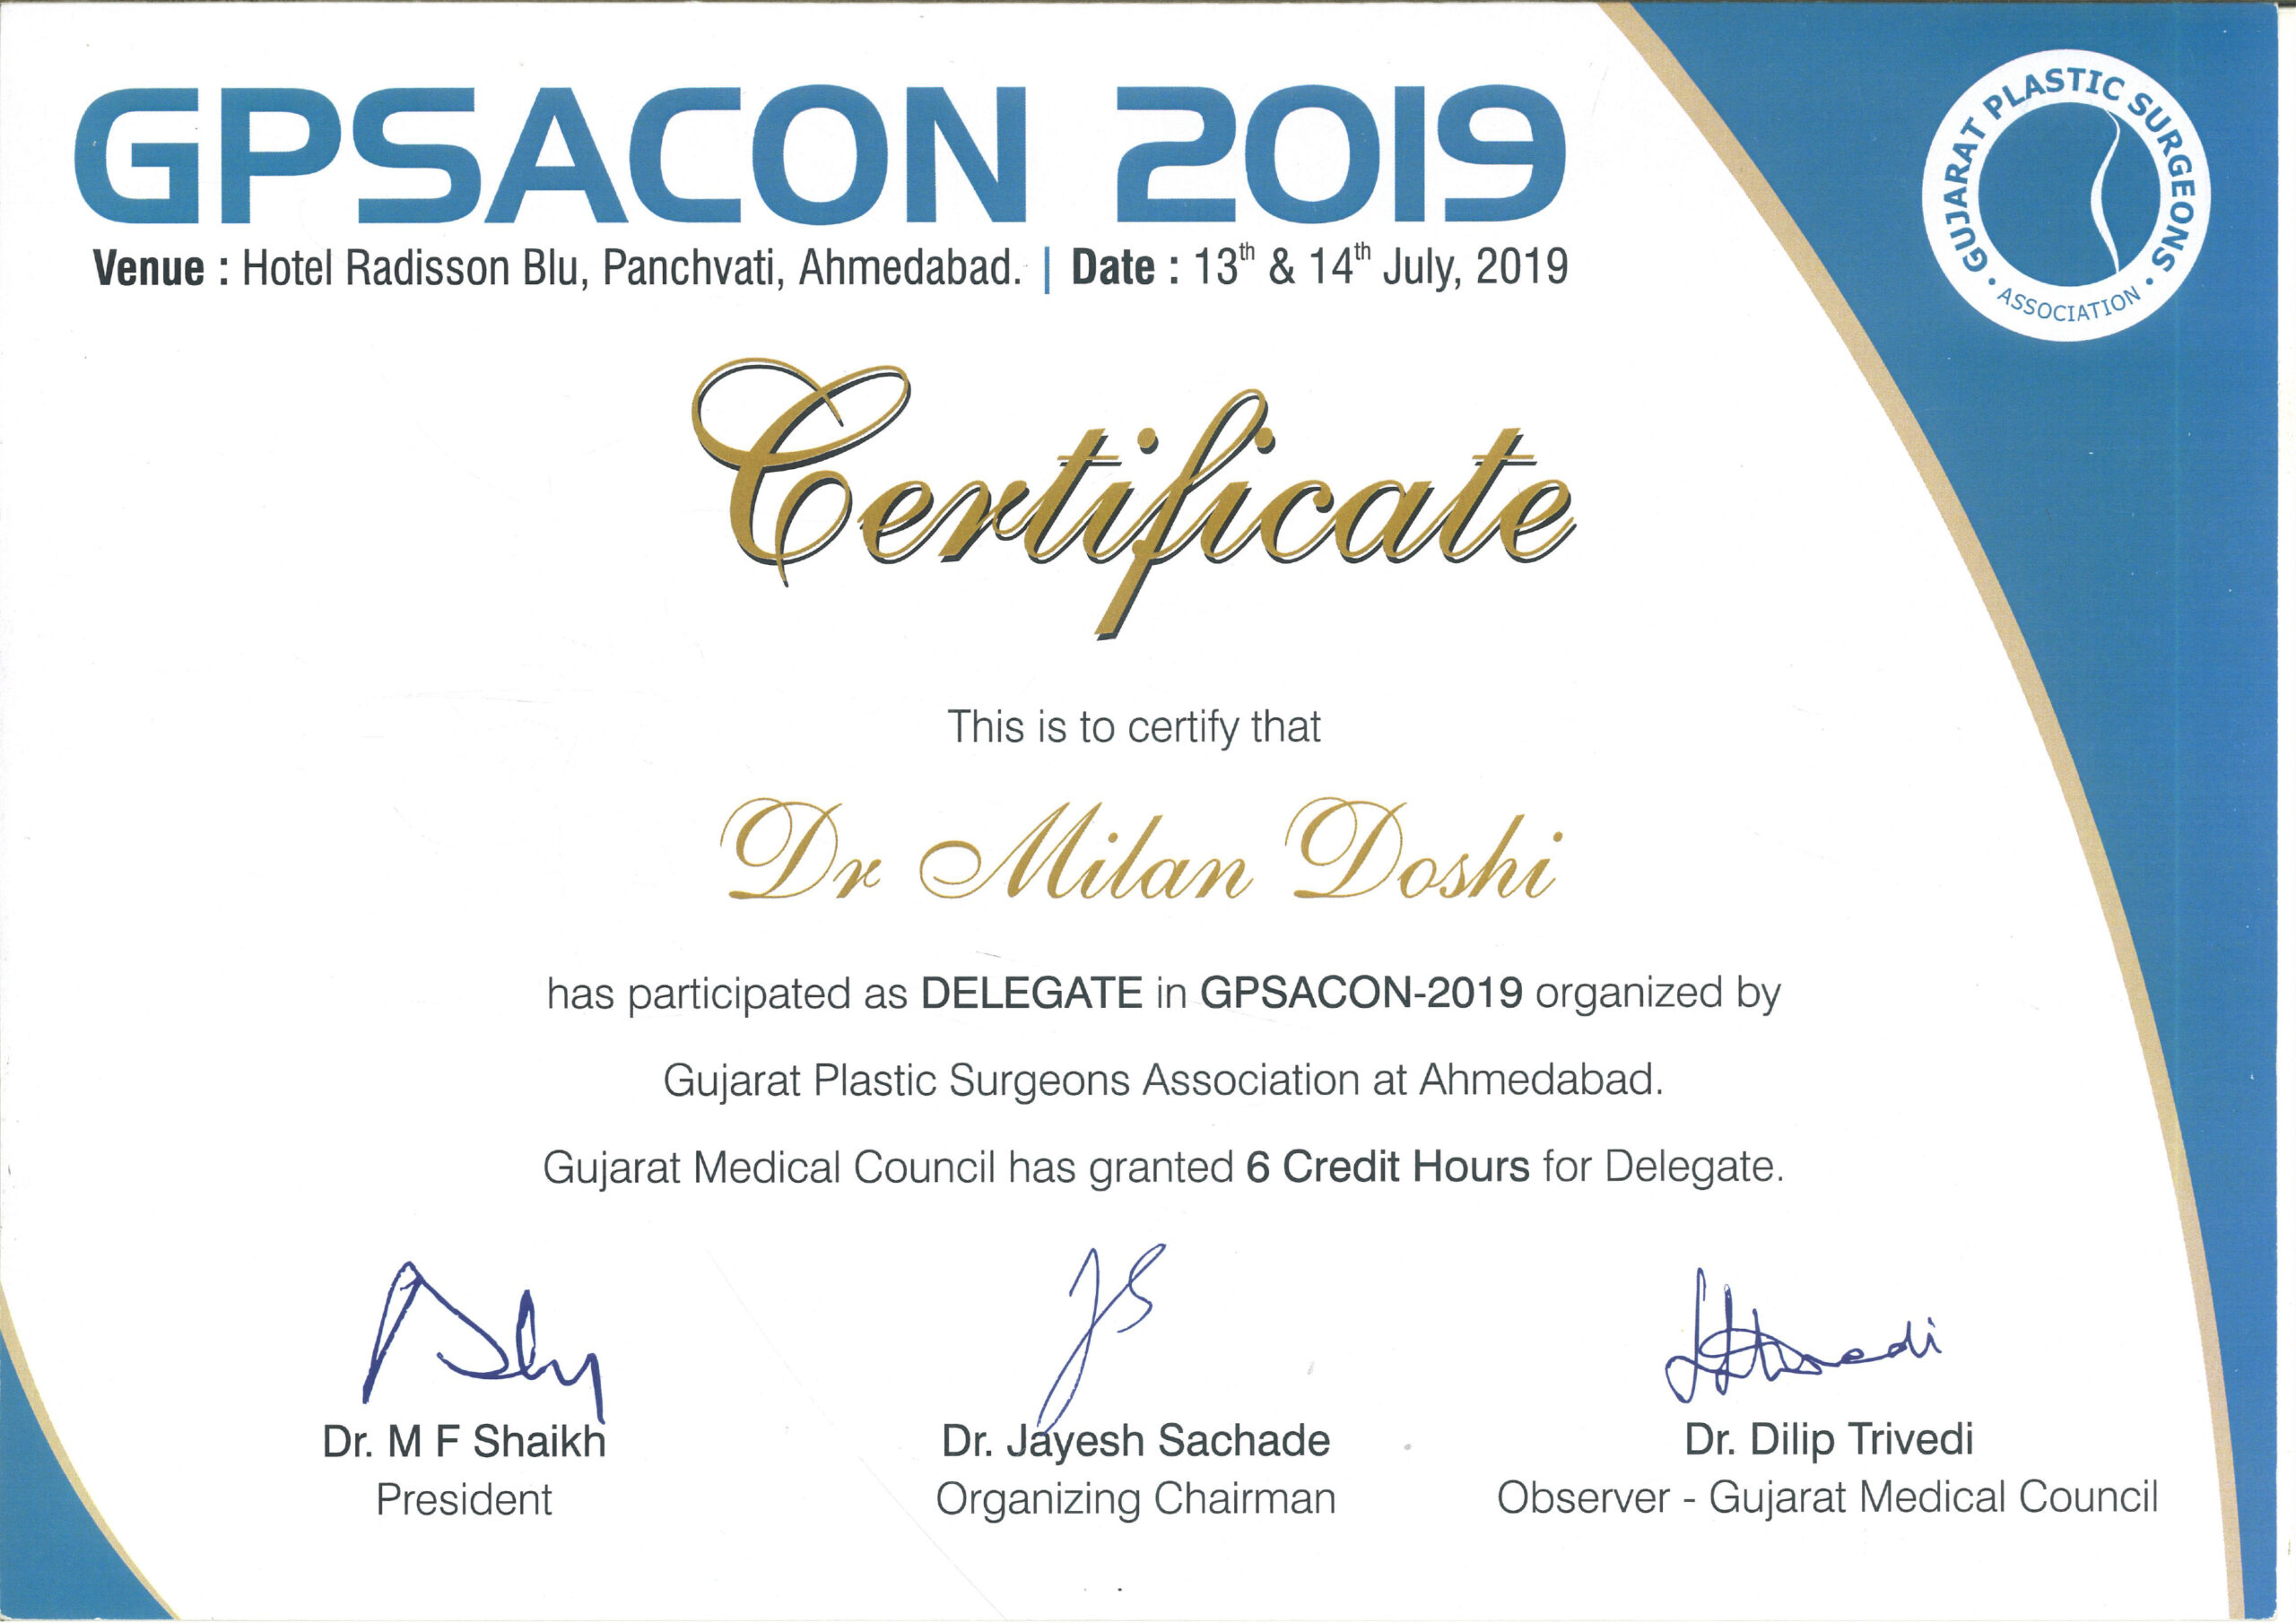 Annual conference of the Gujarat Plastic Surgeons Association in Ahmedadad on 13th and 14th July, 2019